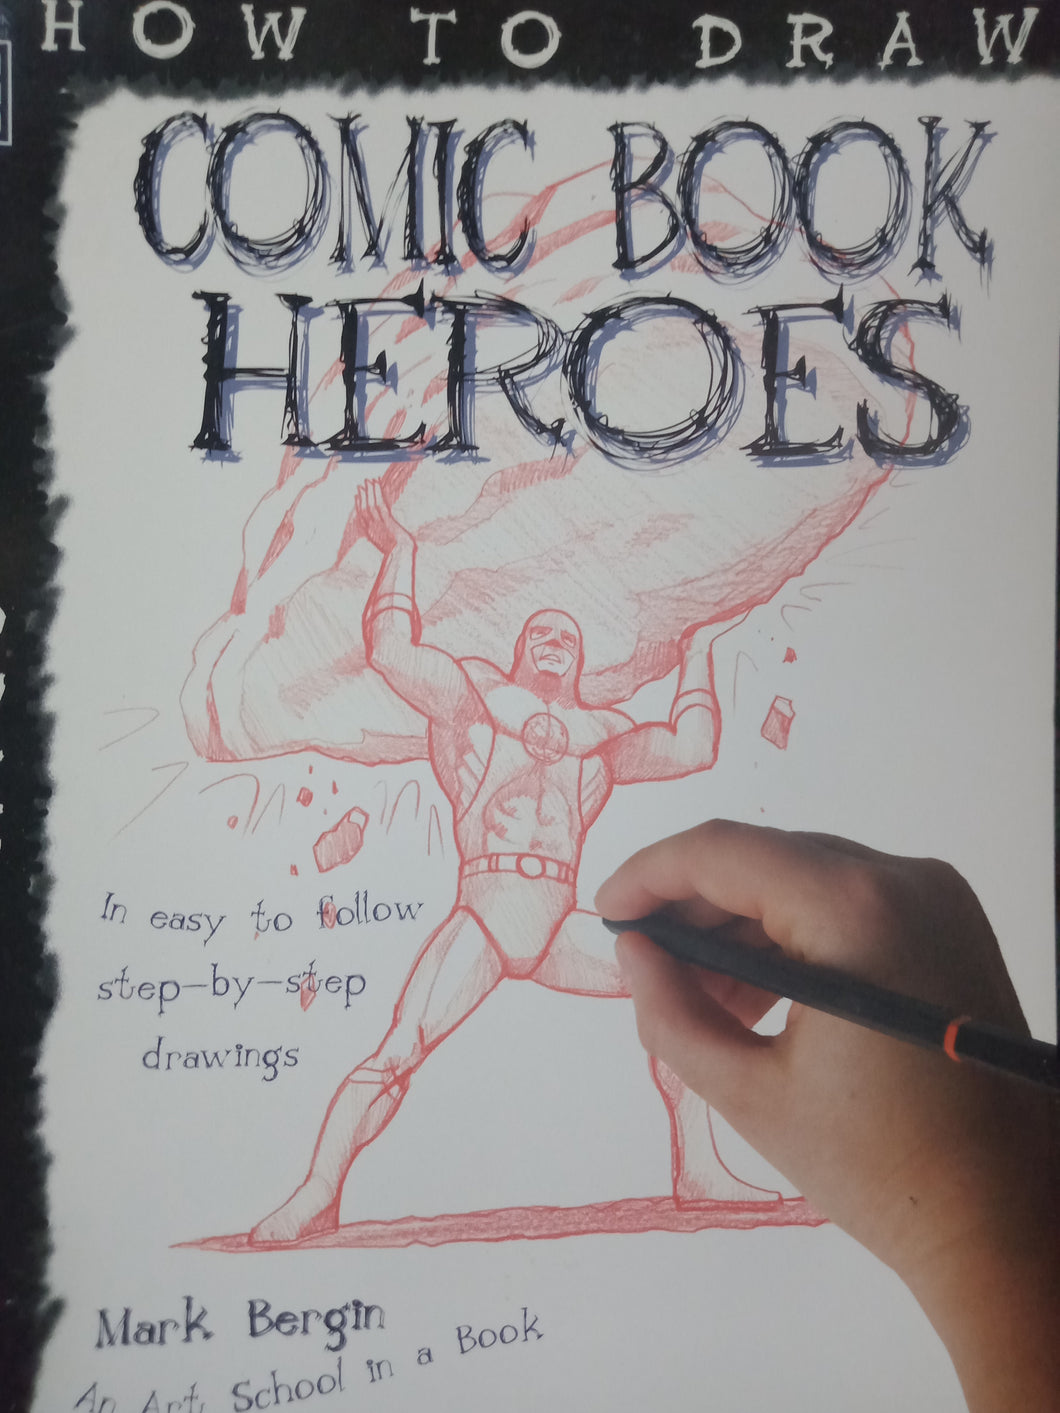 How To Draw Comic Book Heroes - Books for Less Online Bookstore